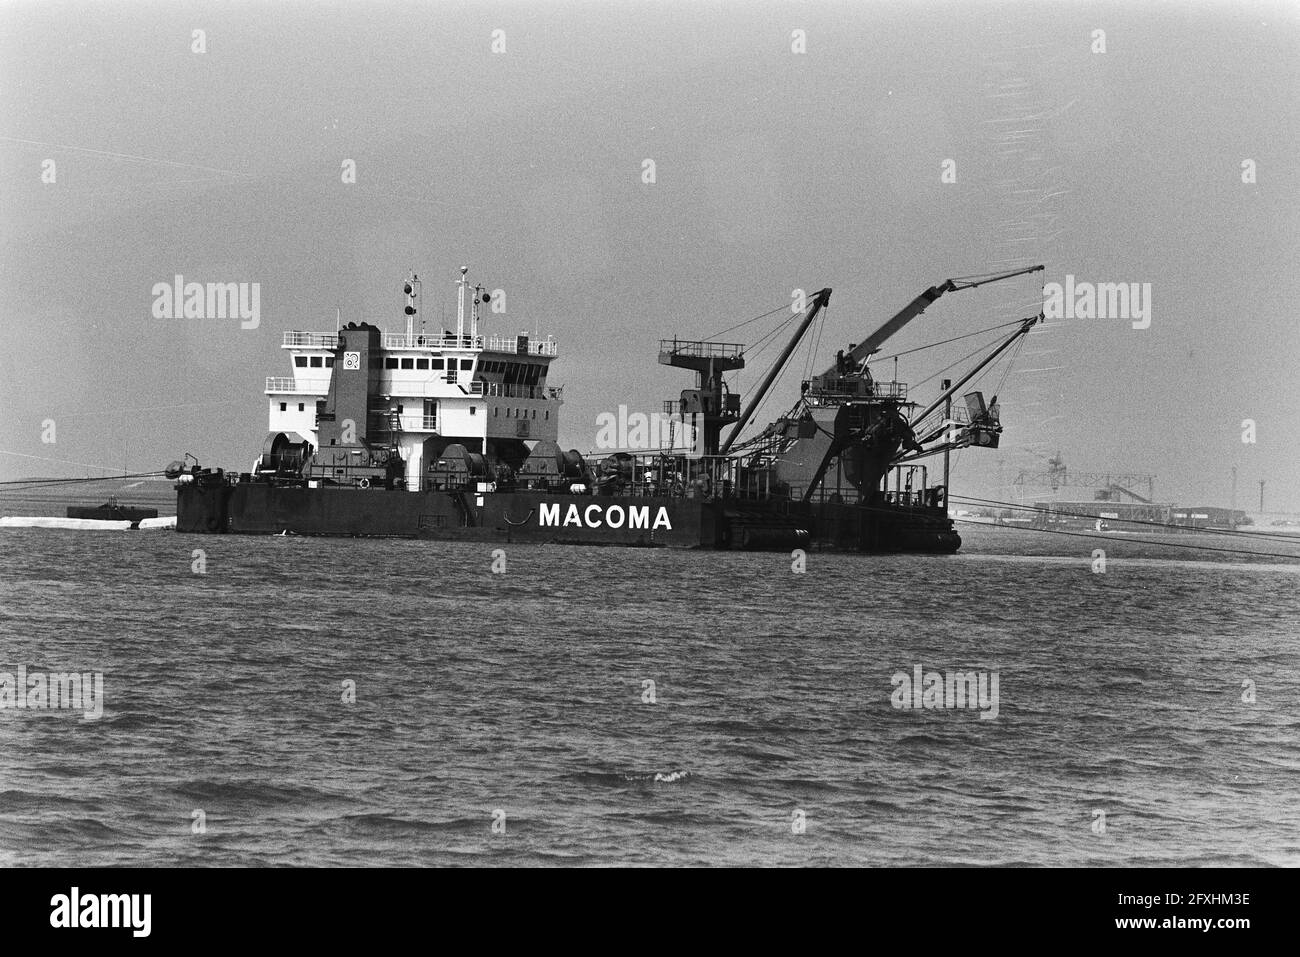 Work vessel Macoma, March 29, 1983, ships, storm surge barriers, hydraulic engineering, The Netherlands, 20th century press agency photo, news to remember, documentary, historic photography 1945-1990, visual stories, human history of the Twentieth Century, capturing moments in time Stock Photo